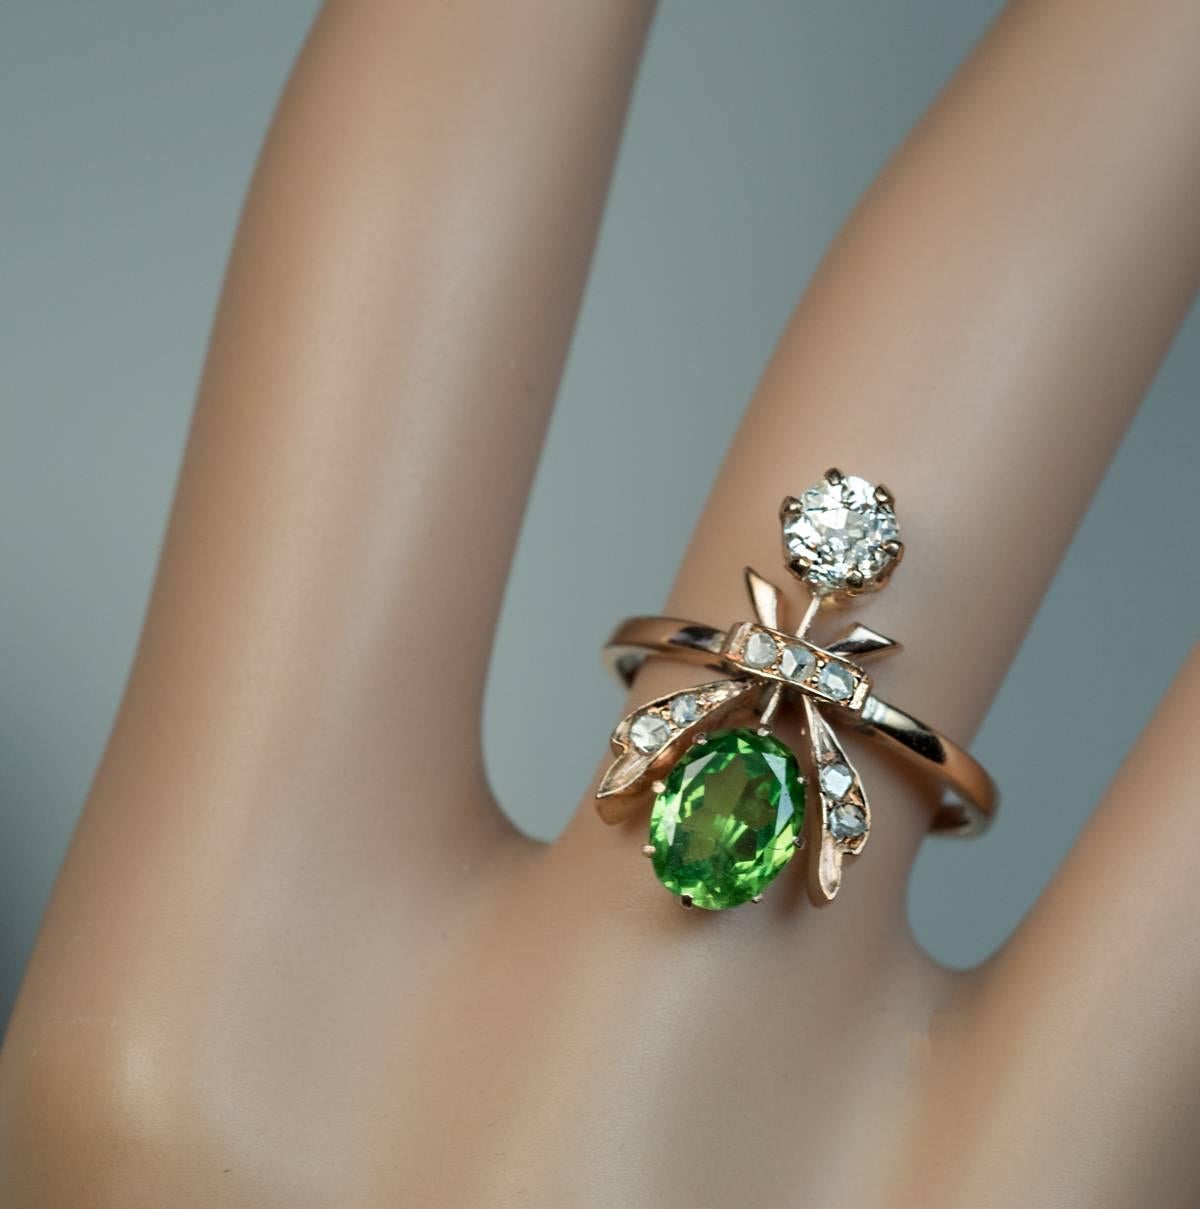 Russian, made between 1899 and 1908

A 14k gold ring is designed as a stylized flower or a fly. The ring is set with one 1.22 ct Russian demantoid of excellent color and clarity, one old European cut diamond (4.4 – 4.6 x 3.4 mm, approximately 0.43